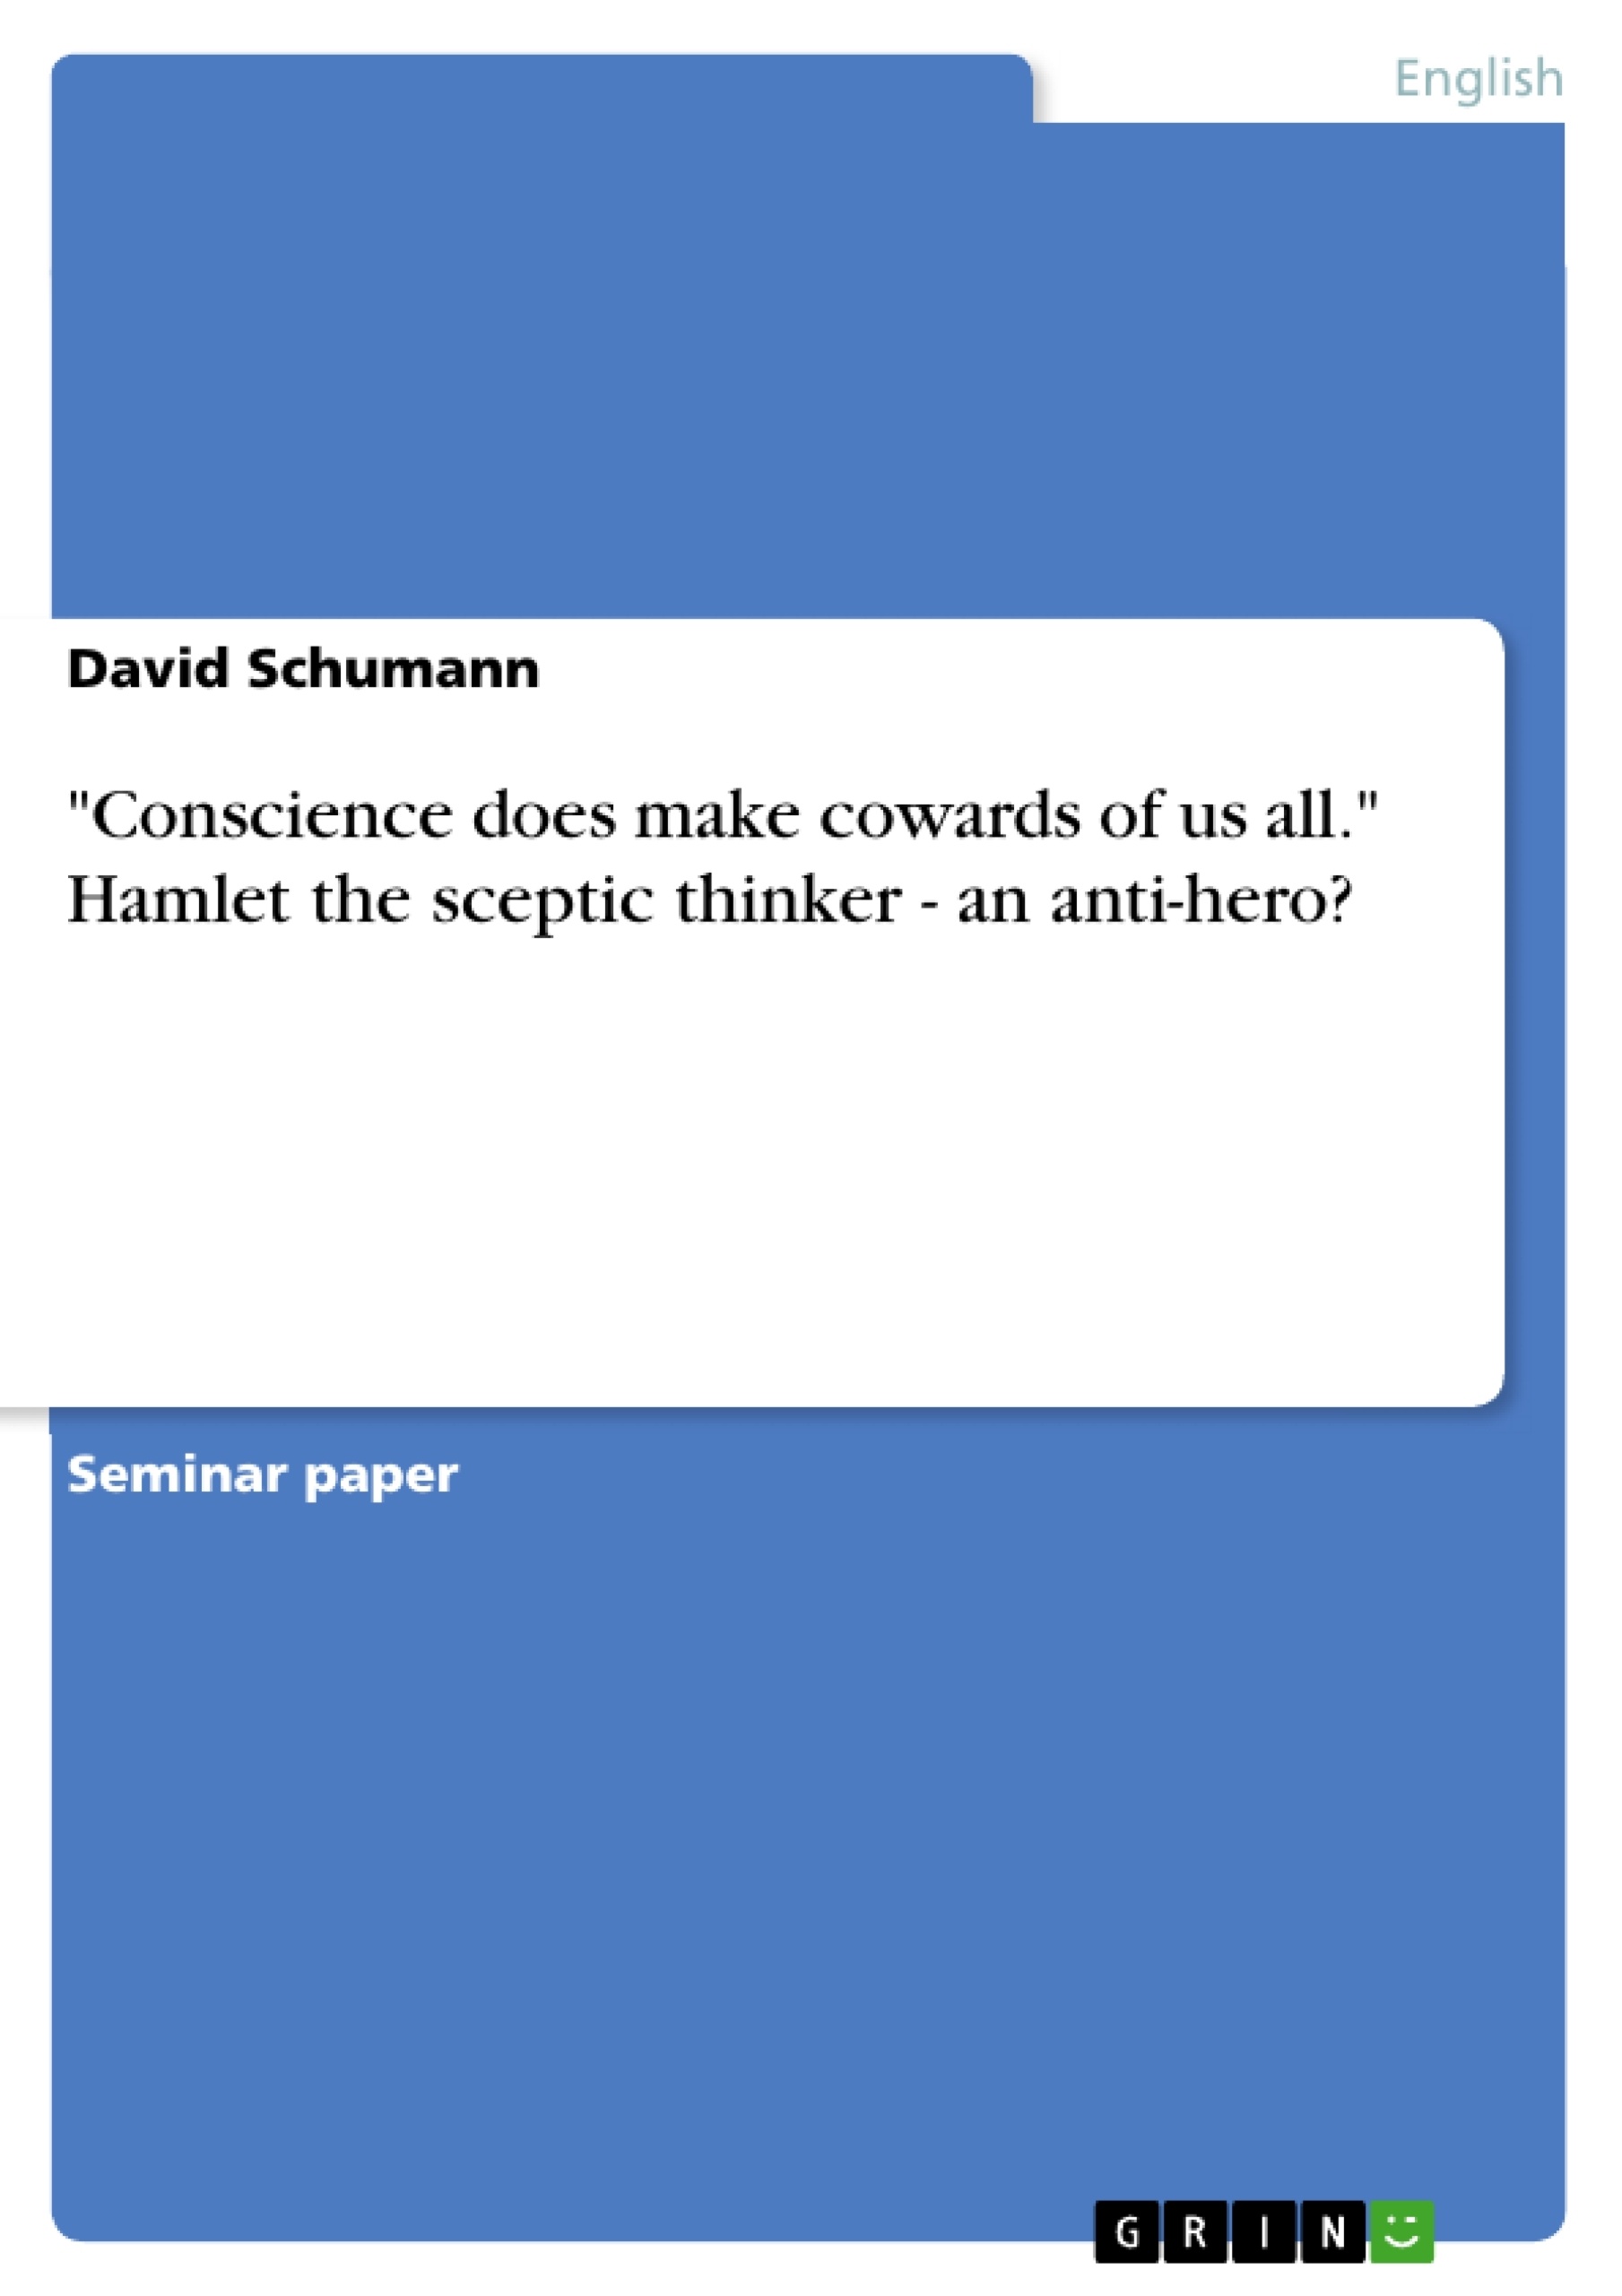 Título: "Conscience does make cowards of us all." Hamlet the sceptic thinker - an anti-hero?